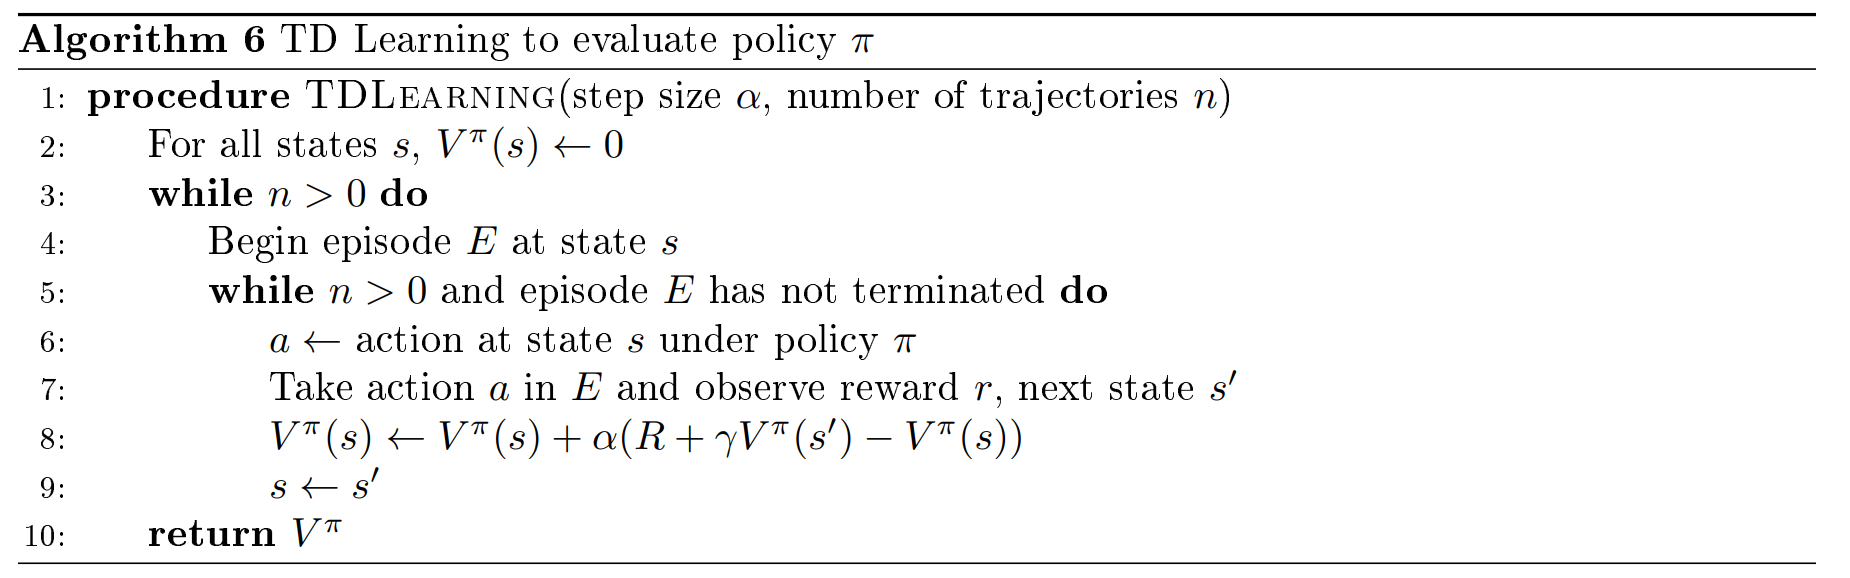 docs/stanford-cs234-notes-zh/img/fig3_alg_6.png